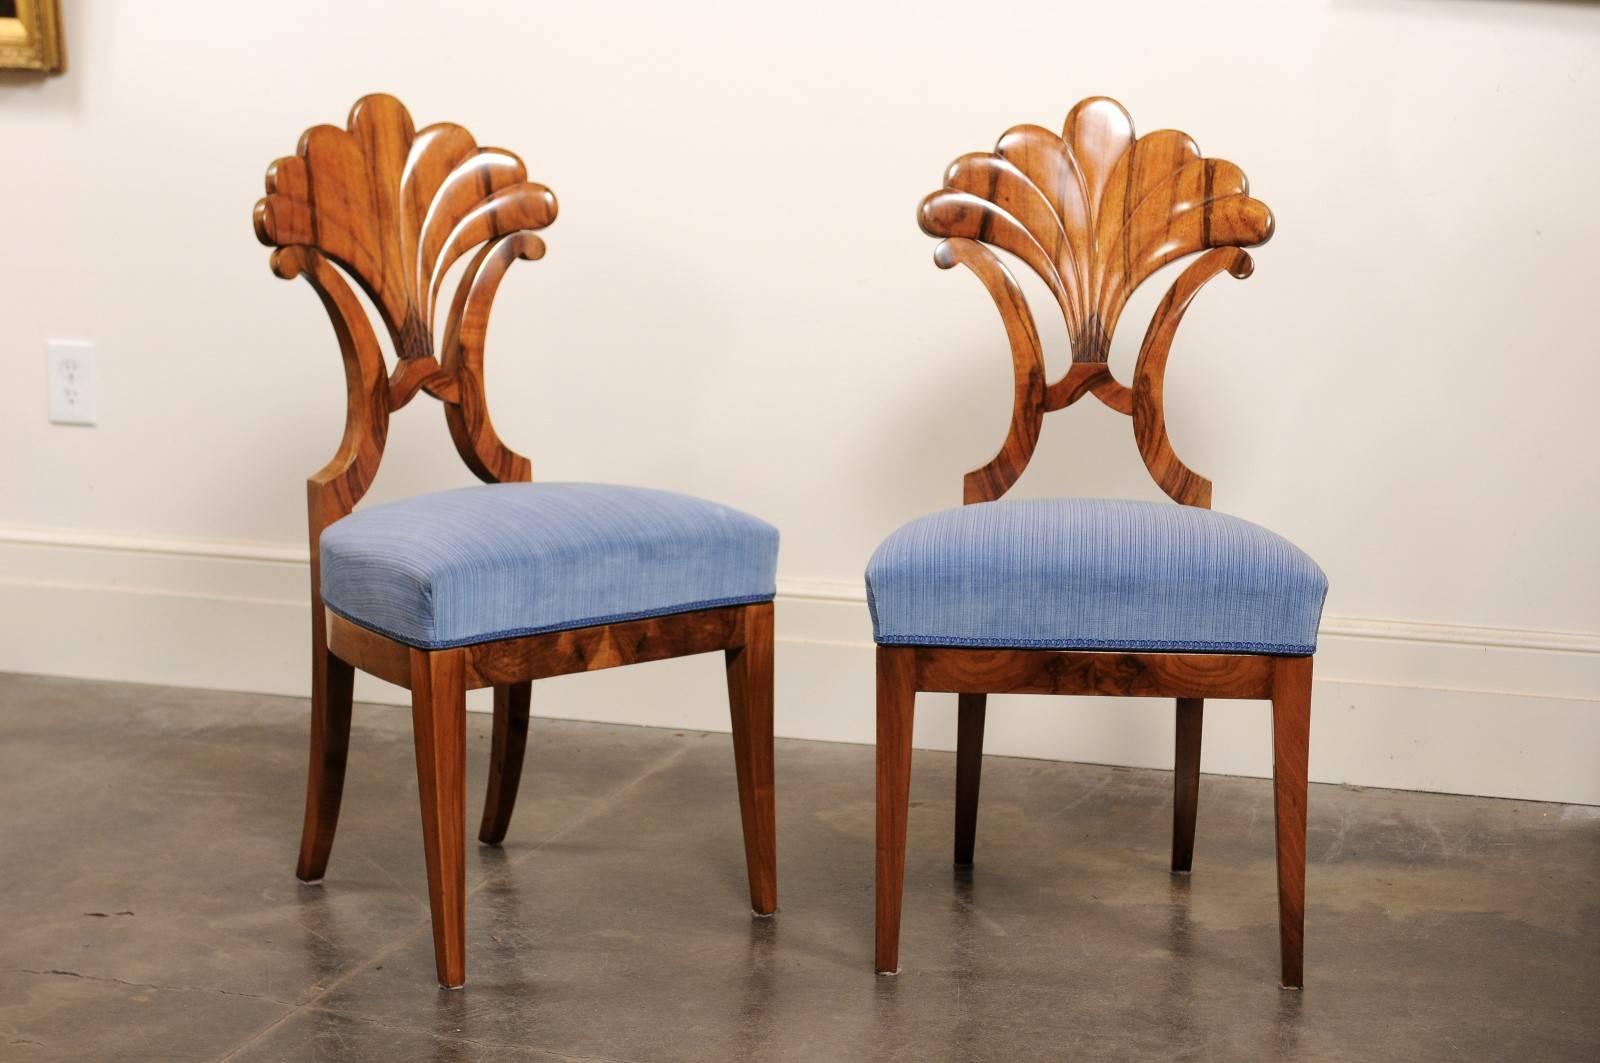 This pair of exquisite Biedermeier side chairs from the mid-19th century features fan shaped backs over light blue upholstered seats. The chairs, made of walnut, are raised on two front tapered legs and two saber legs in the back. The sleek, simple